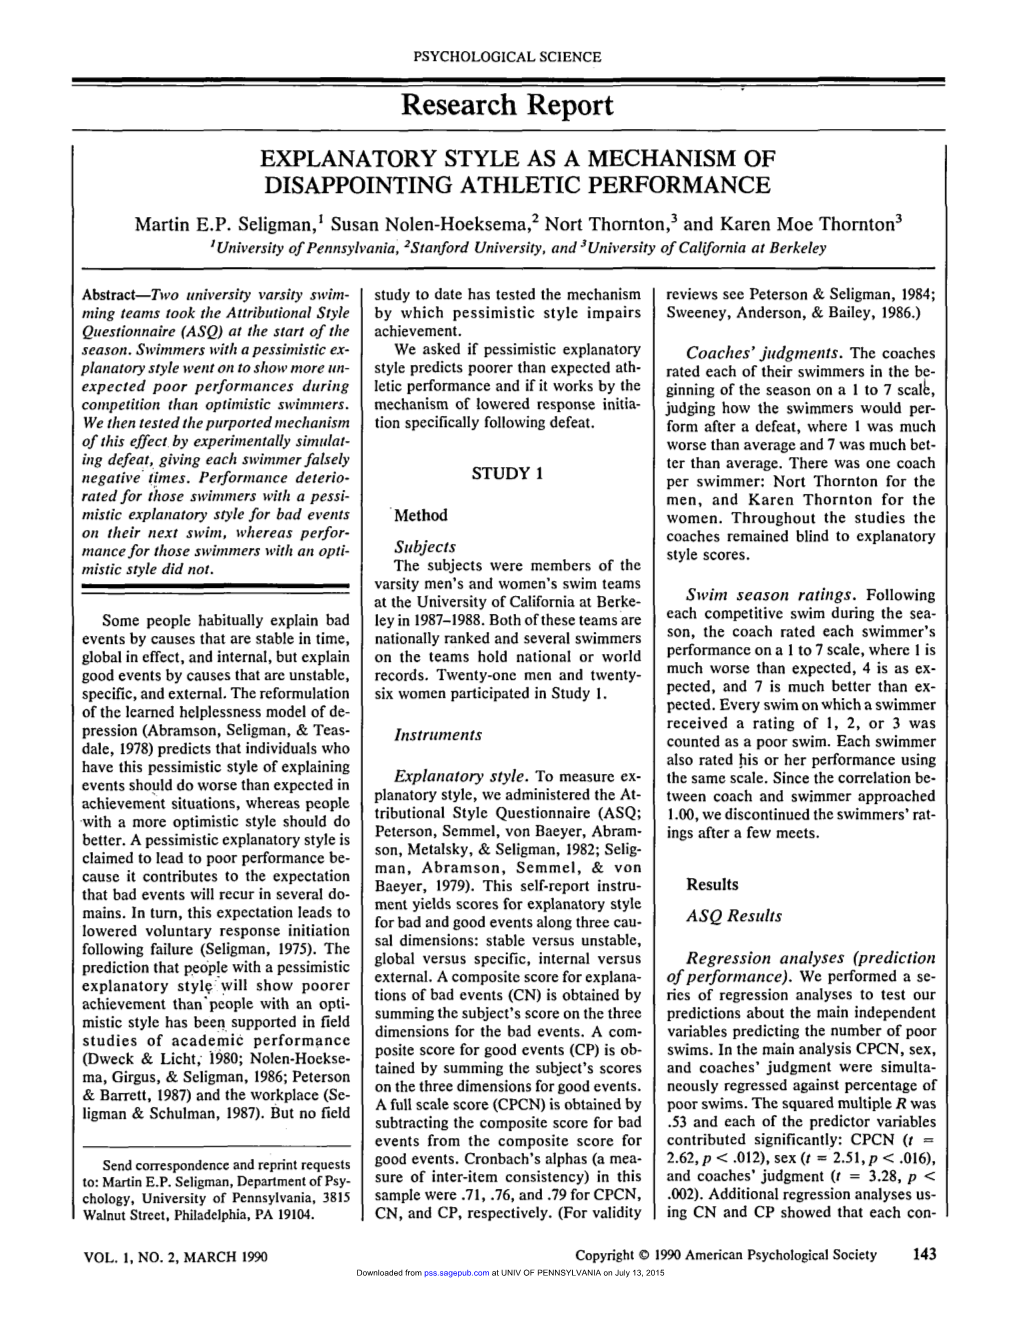 EXPLANATORY STYLE AS a MECHANISM of DISAPPOINTING ATHLETIC PERFORMANCE Martin E.P